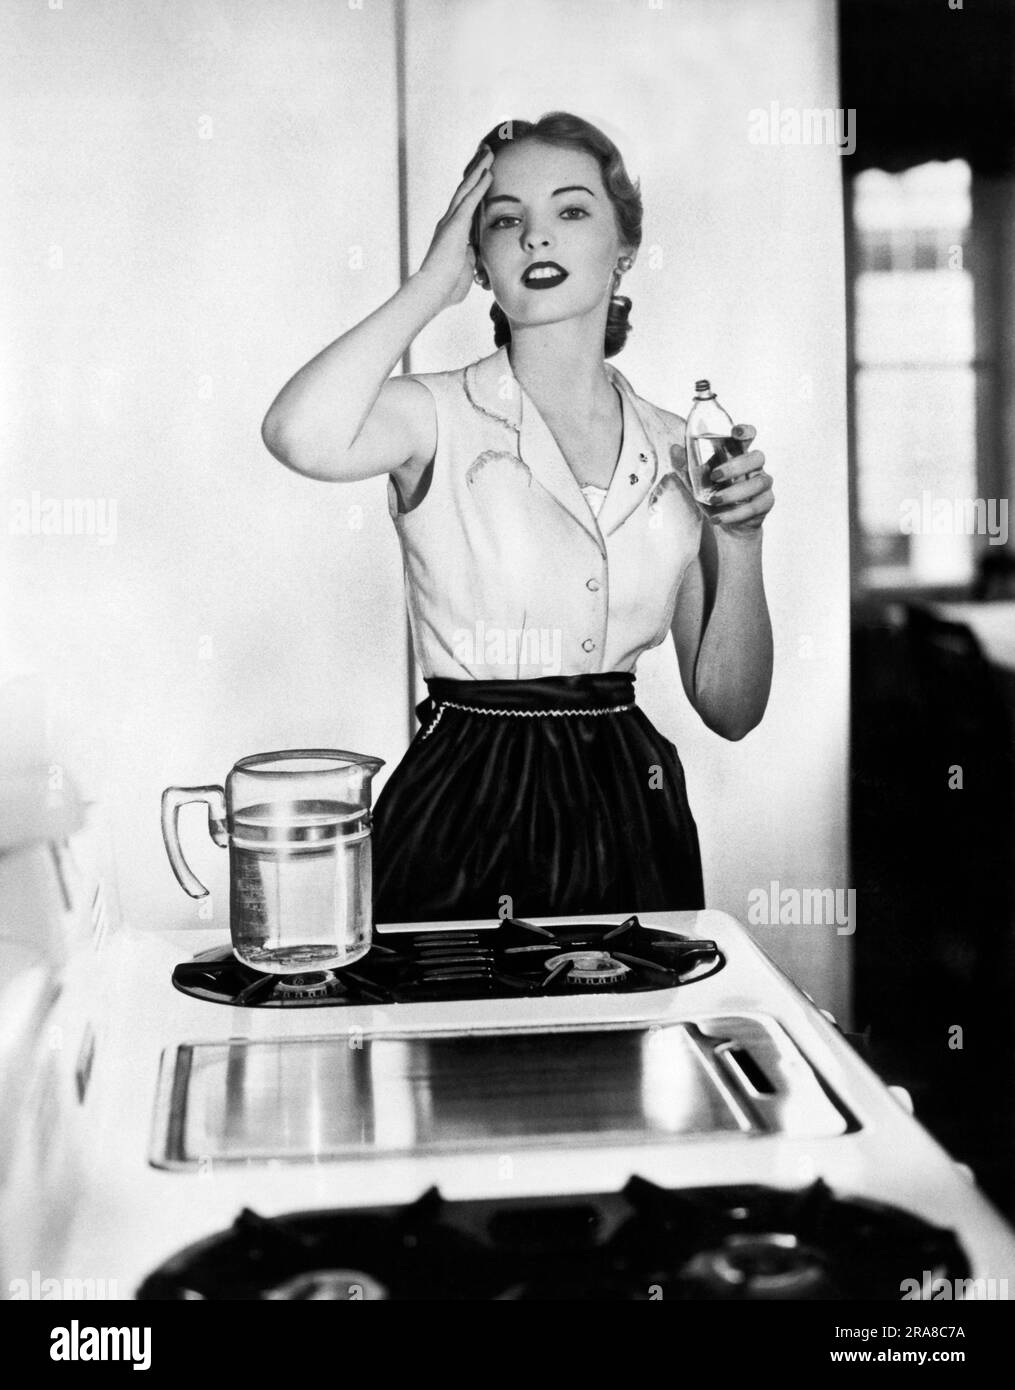 United States:  July, 1951 In this photograph from the Frangrance Foundation, 'Despite the heat from the stove in the summertime, this young homemaker will appear crisp and pretty at mealtime thanks to kitchen fresh-ups with cooling cologne.' Stock Photo